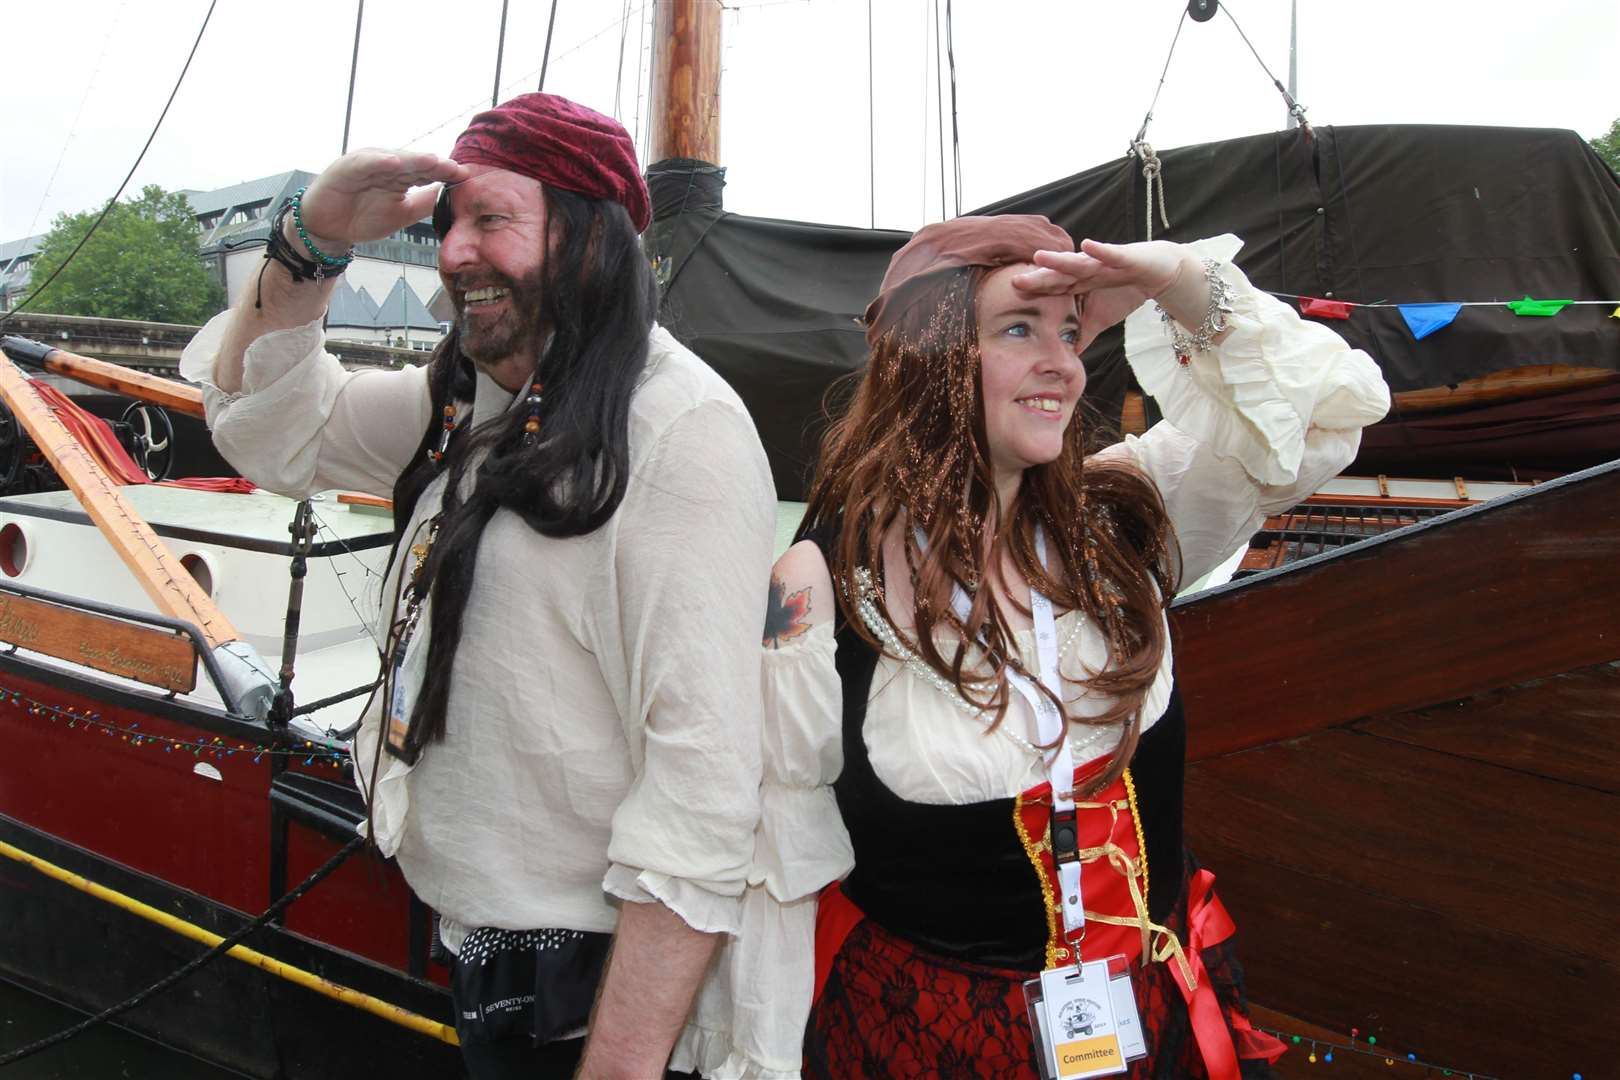 From left, Marcus Nibblett and Clairey Suzanne, both Maidstone River Festival Committee members at the Maidstone River Festival 2019. Picture: John Westhrop